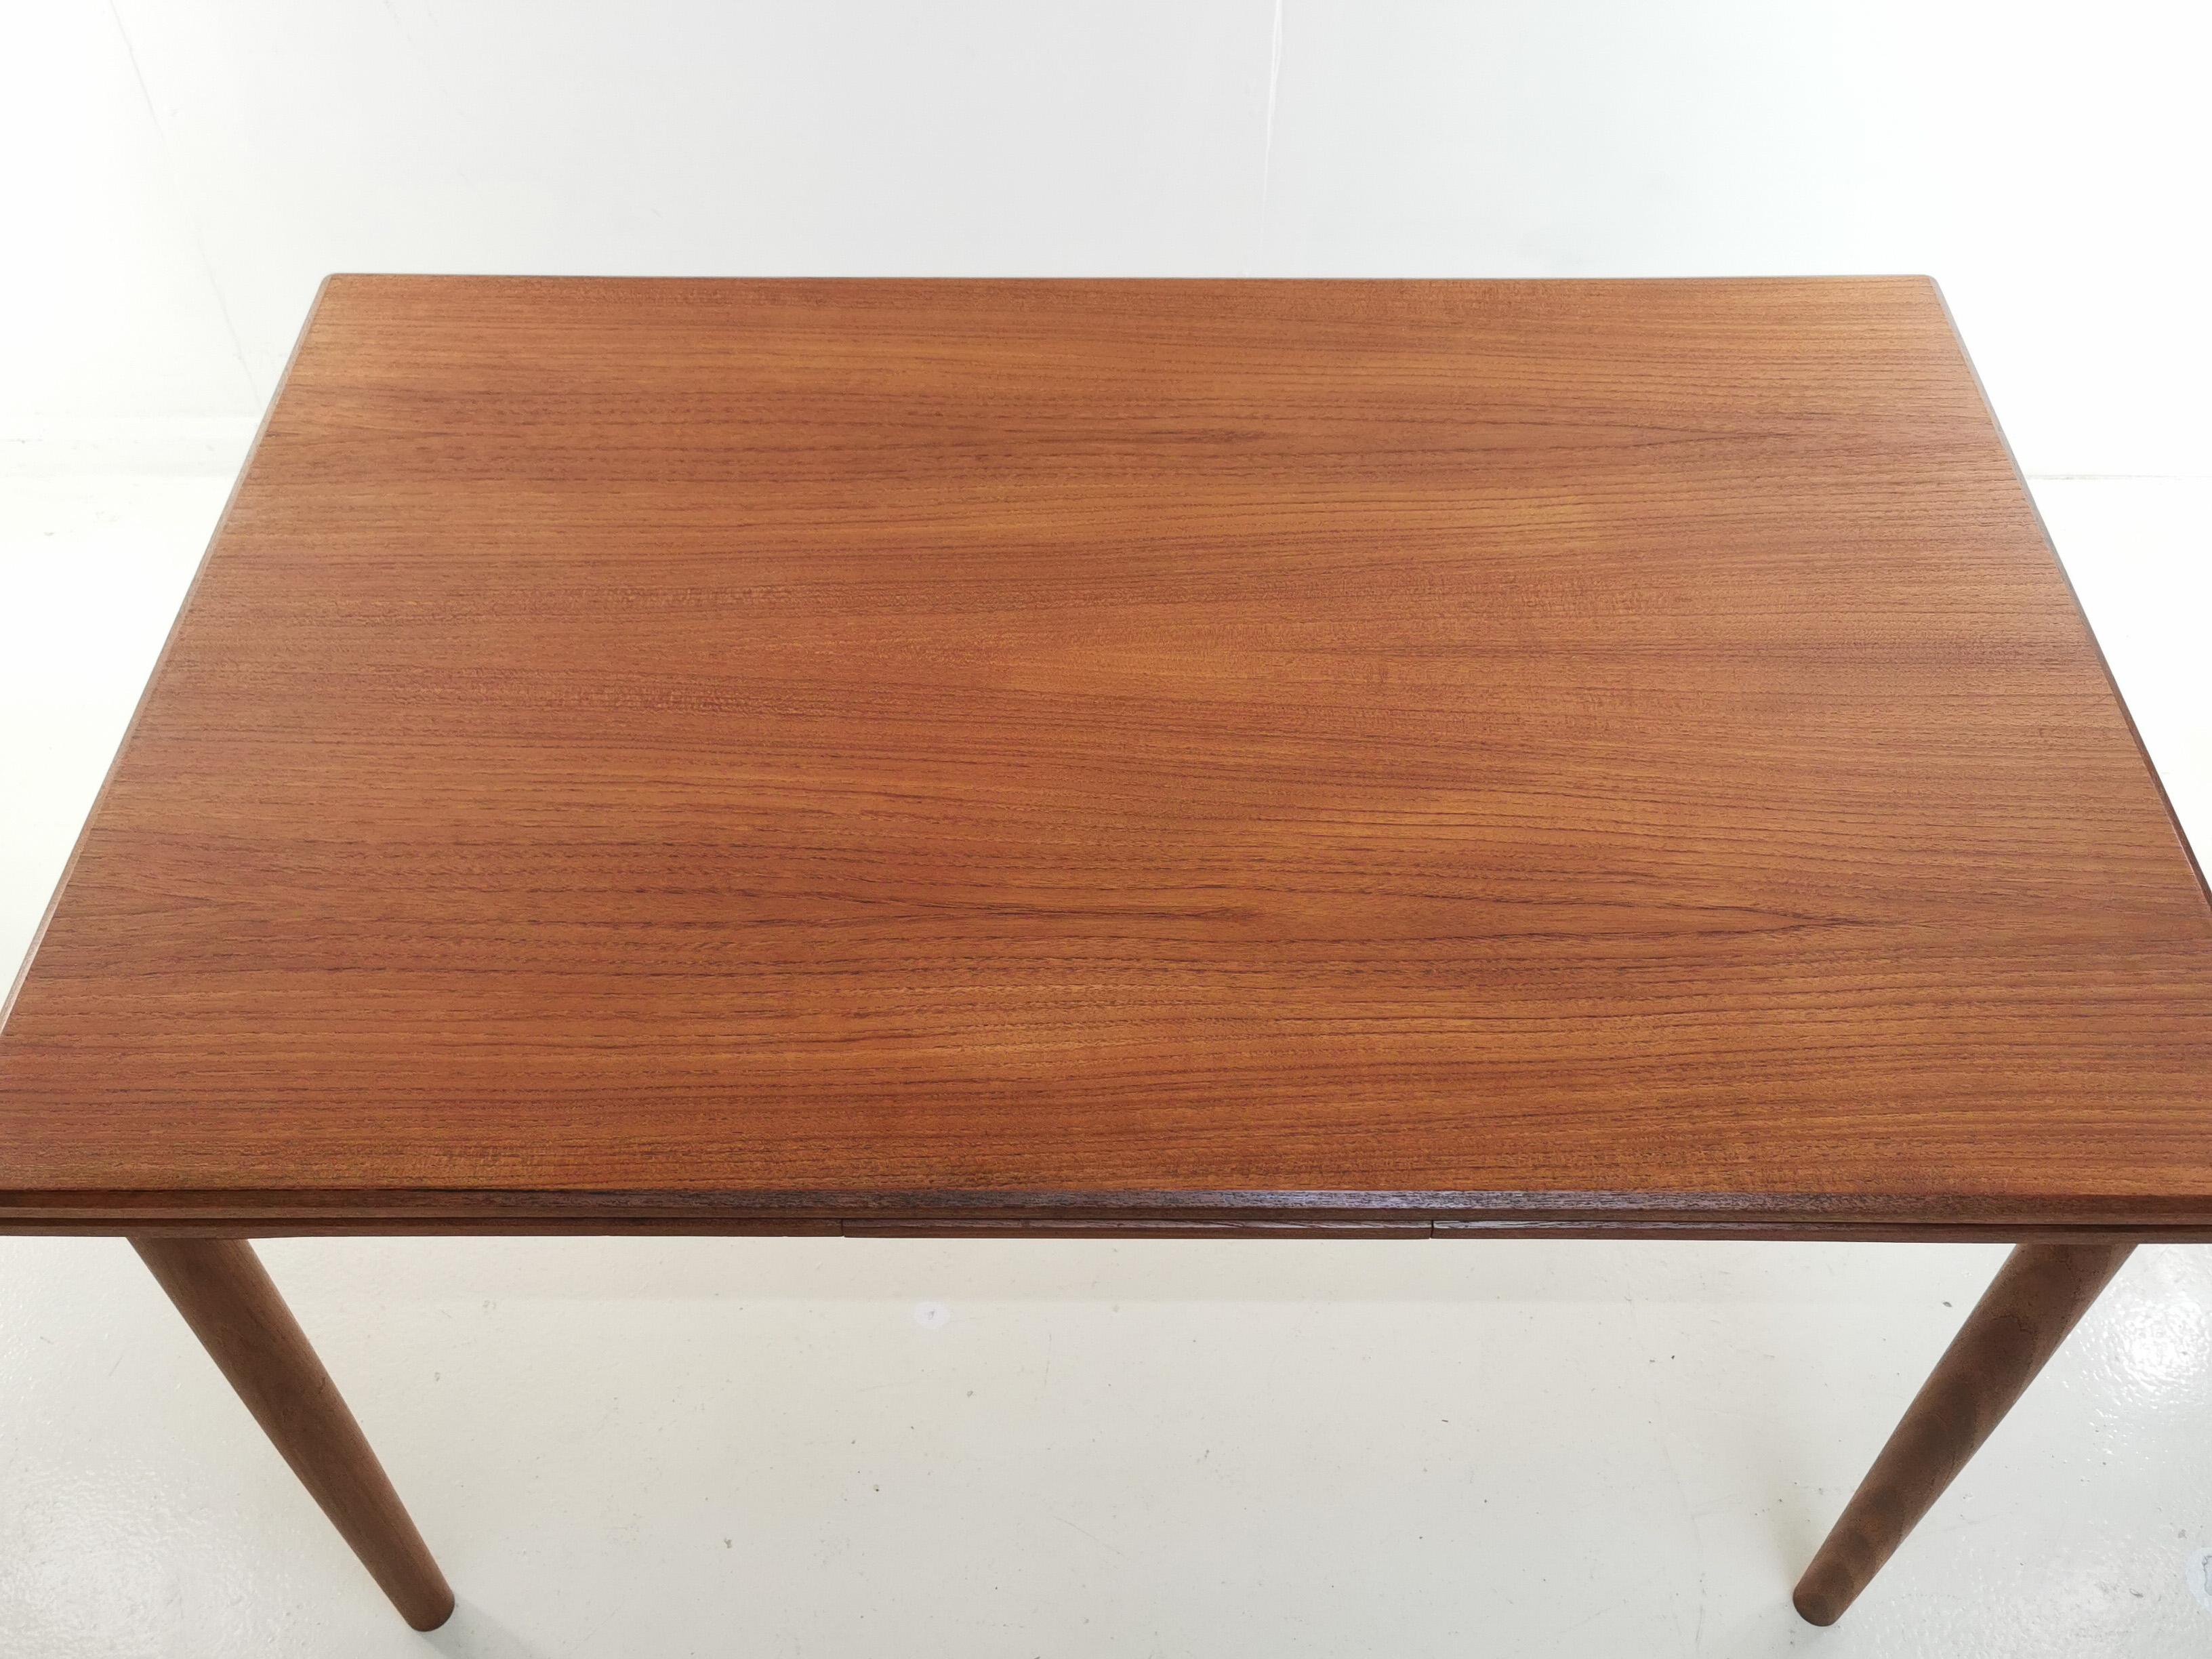 Danish teak extending dining table

Midcentury teak Danish extending dining table by Clausen and Son. 

An excellent example, in superb condition. All parts are running smooth. 

Simple, with clean lines and a practical quality made dining